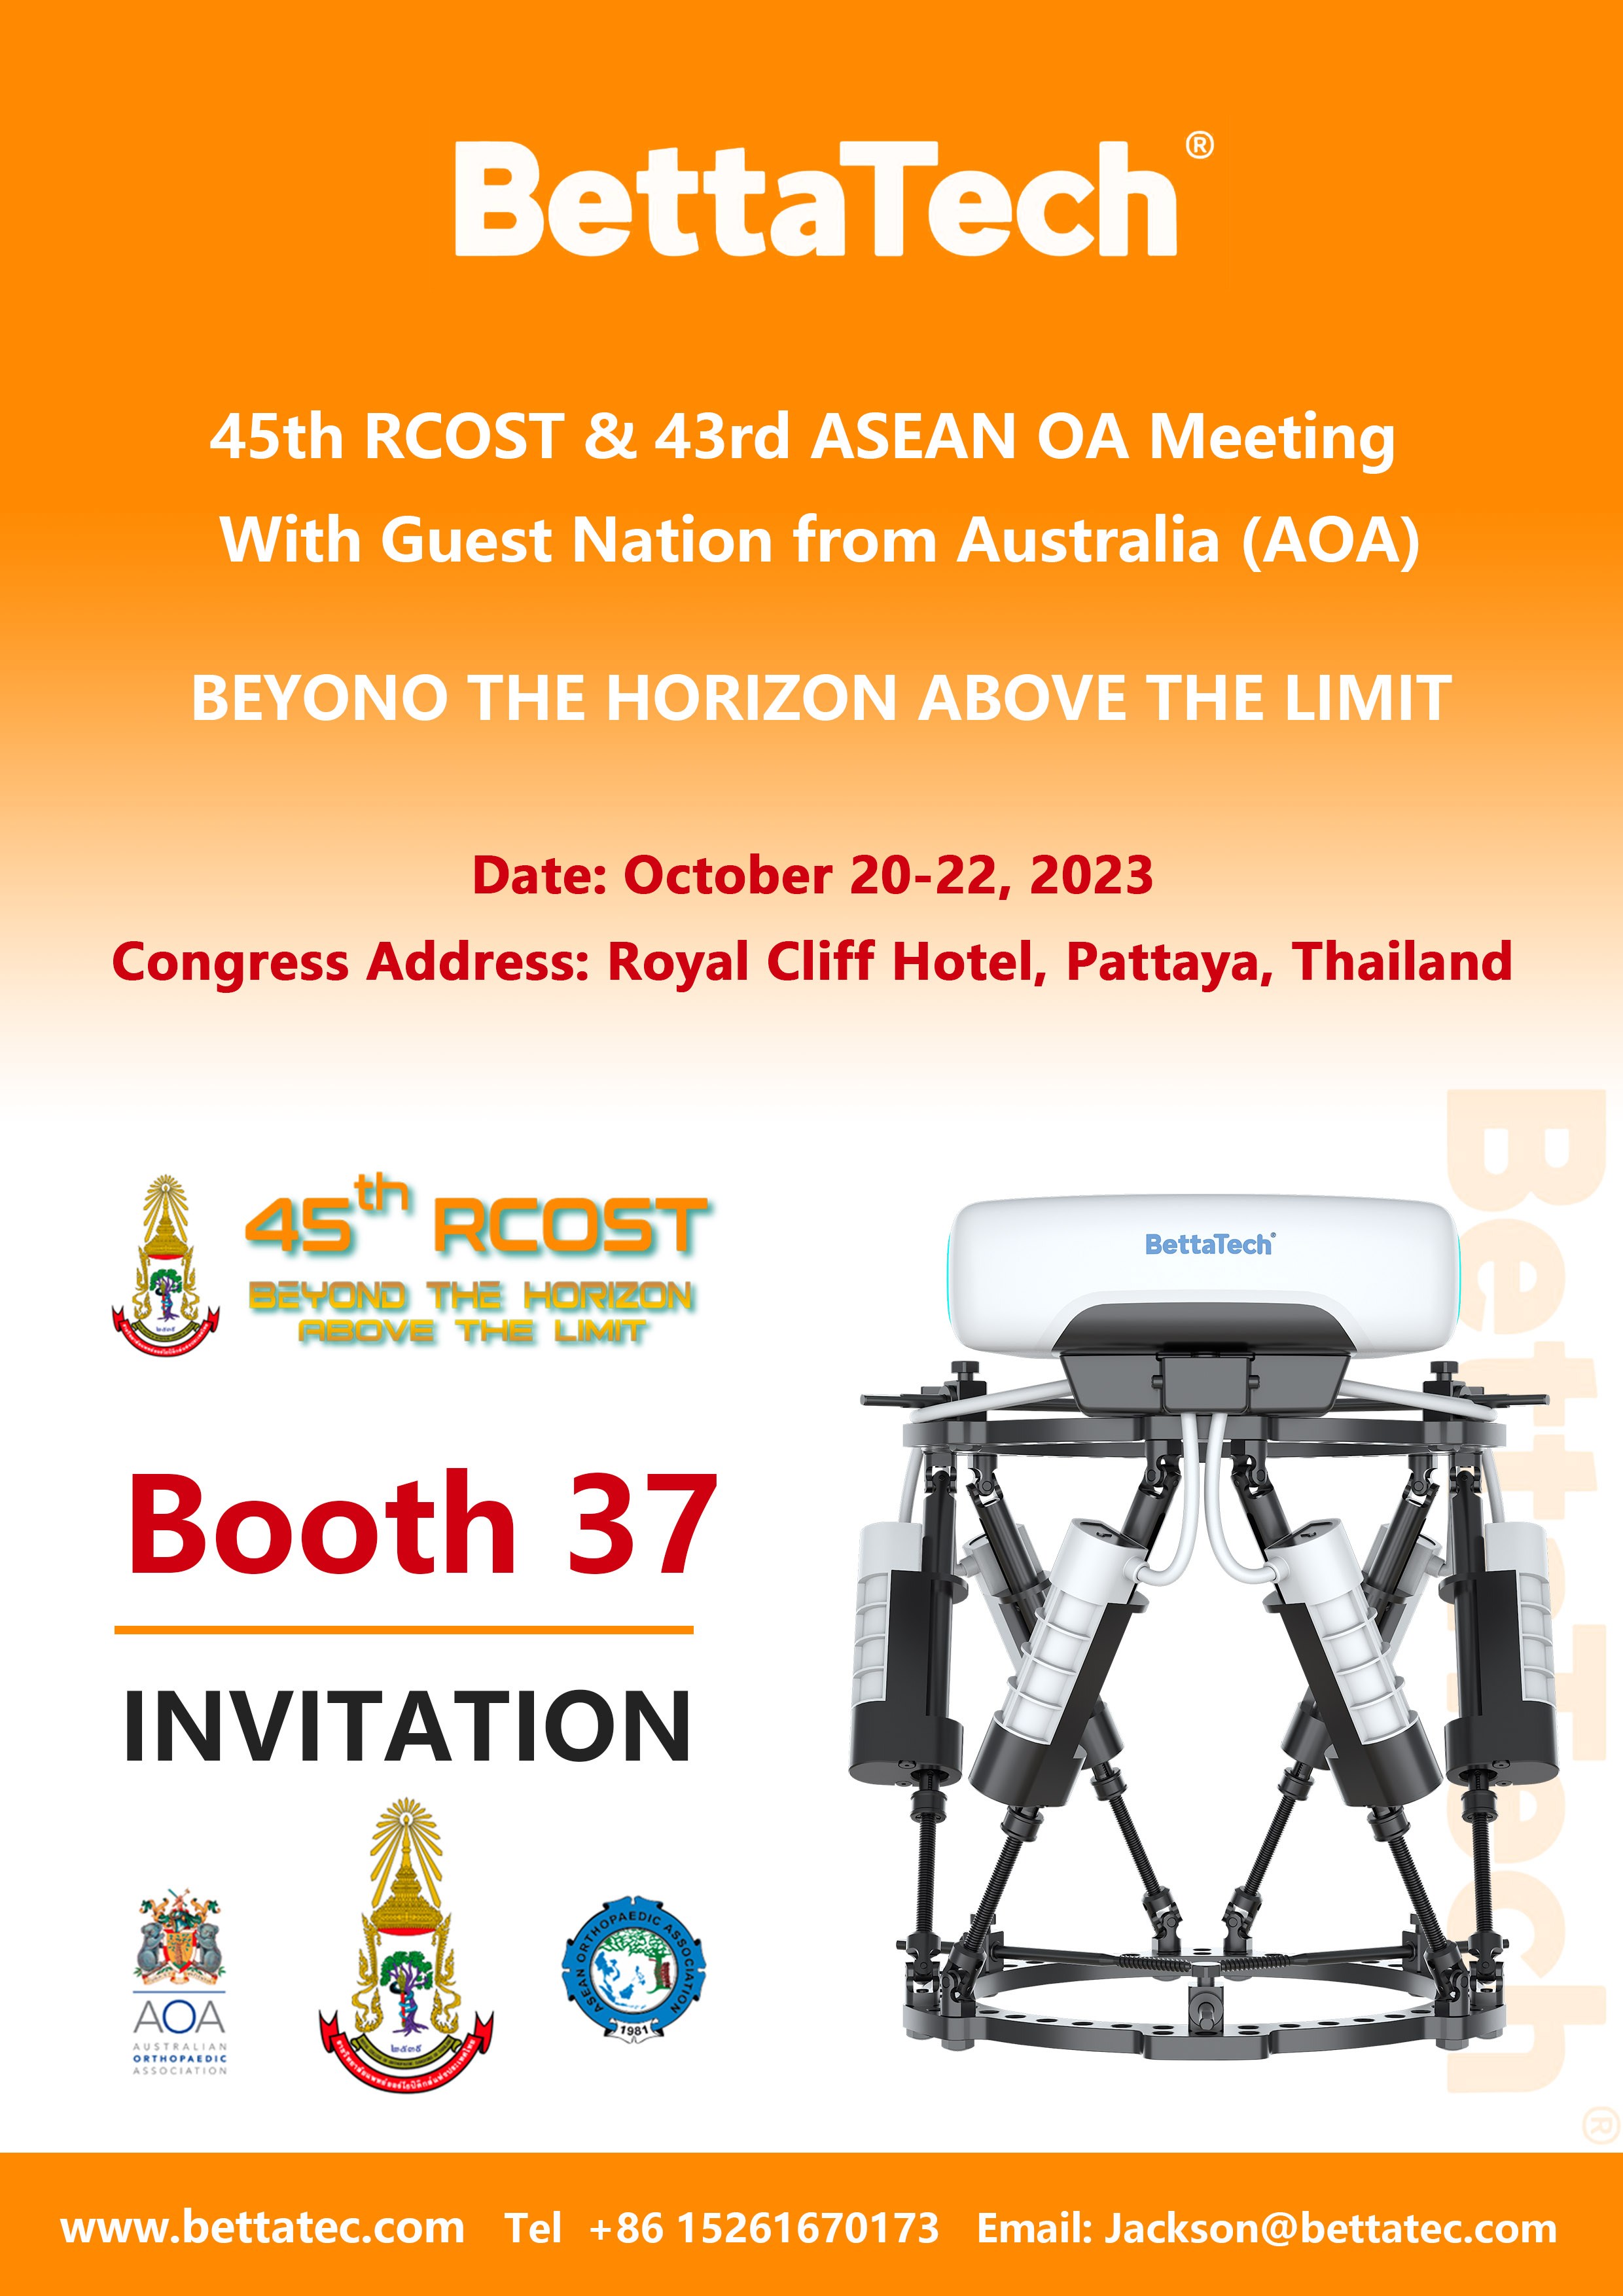 Betta Medical will take Part in the 45th Rcost in Pattaya